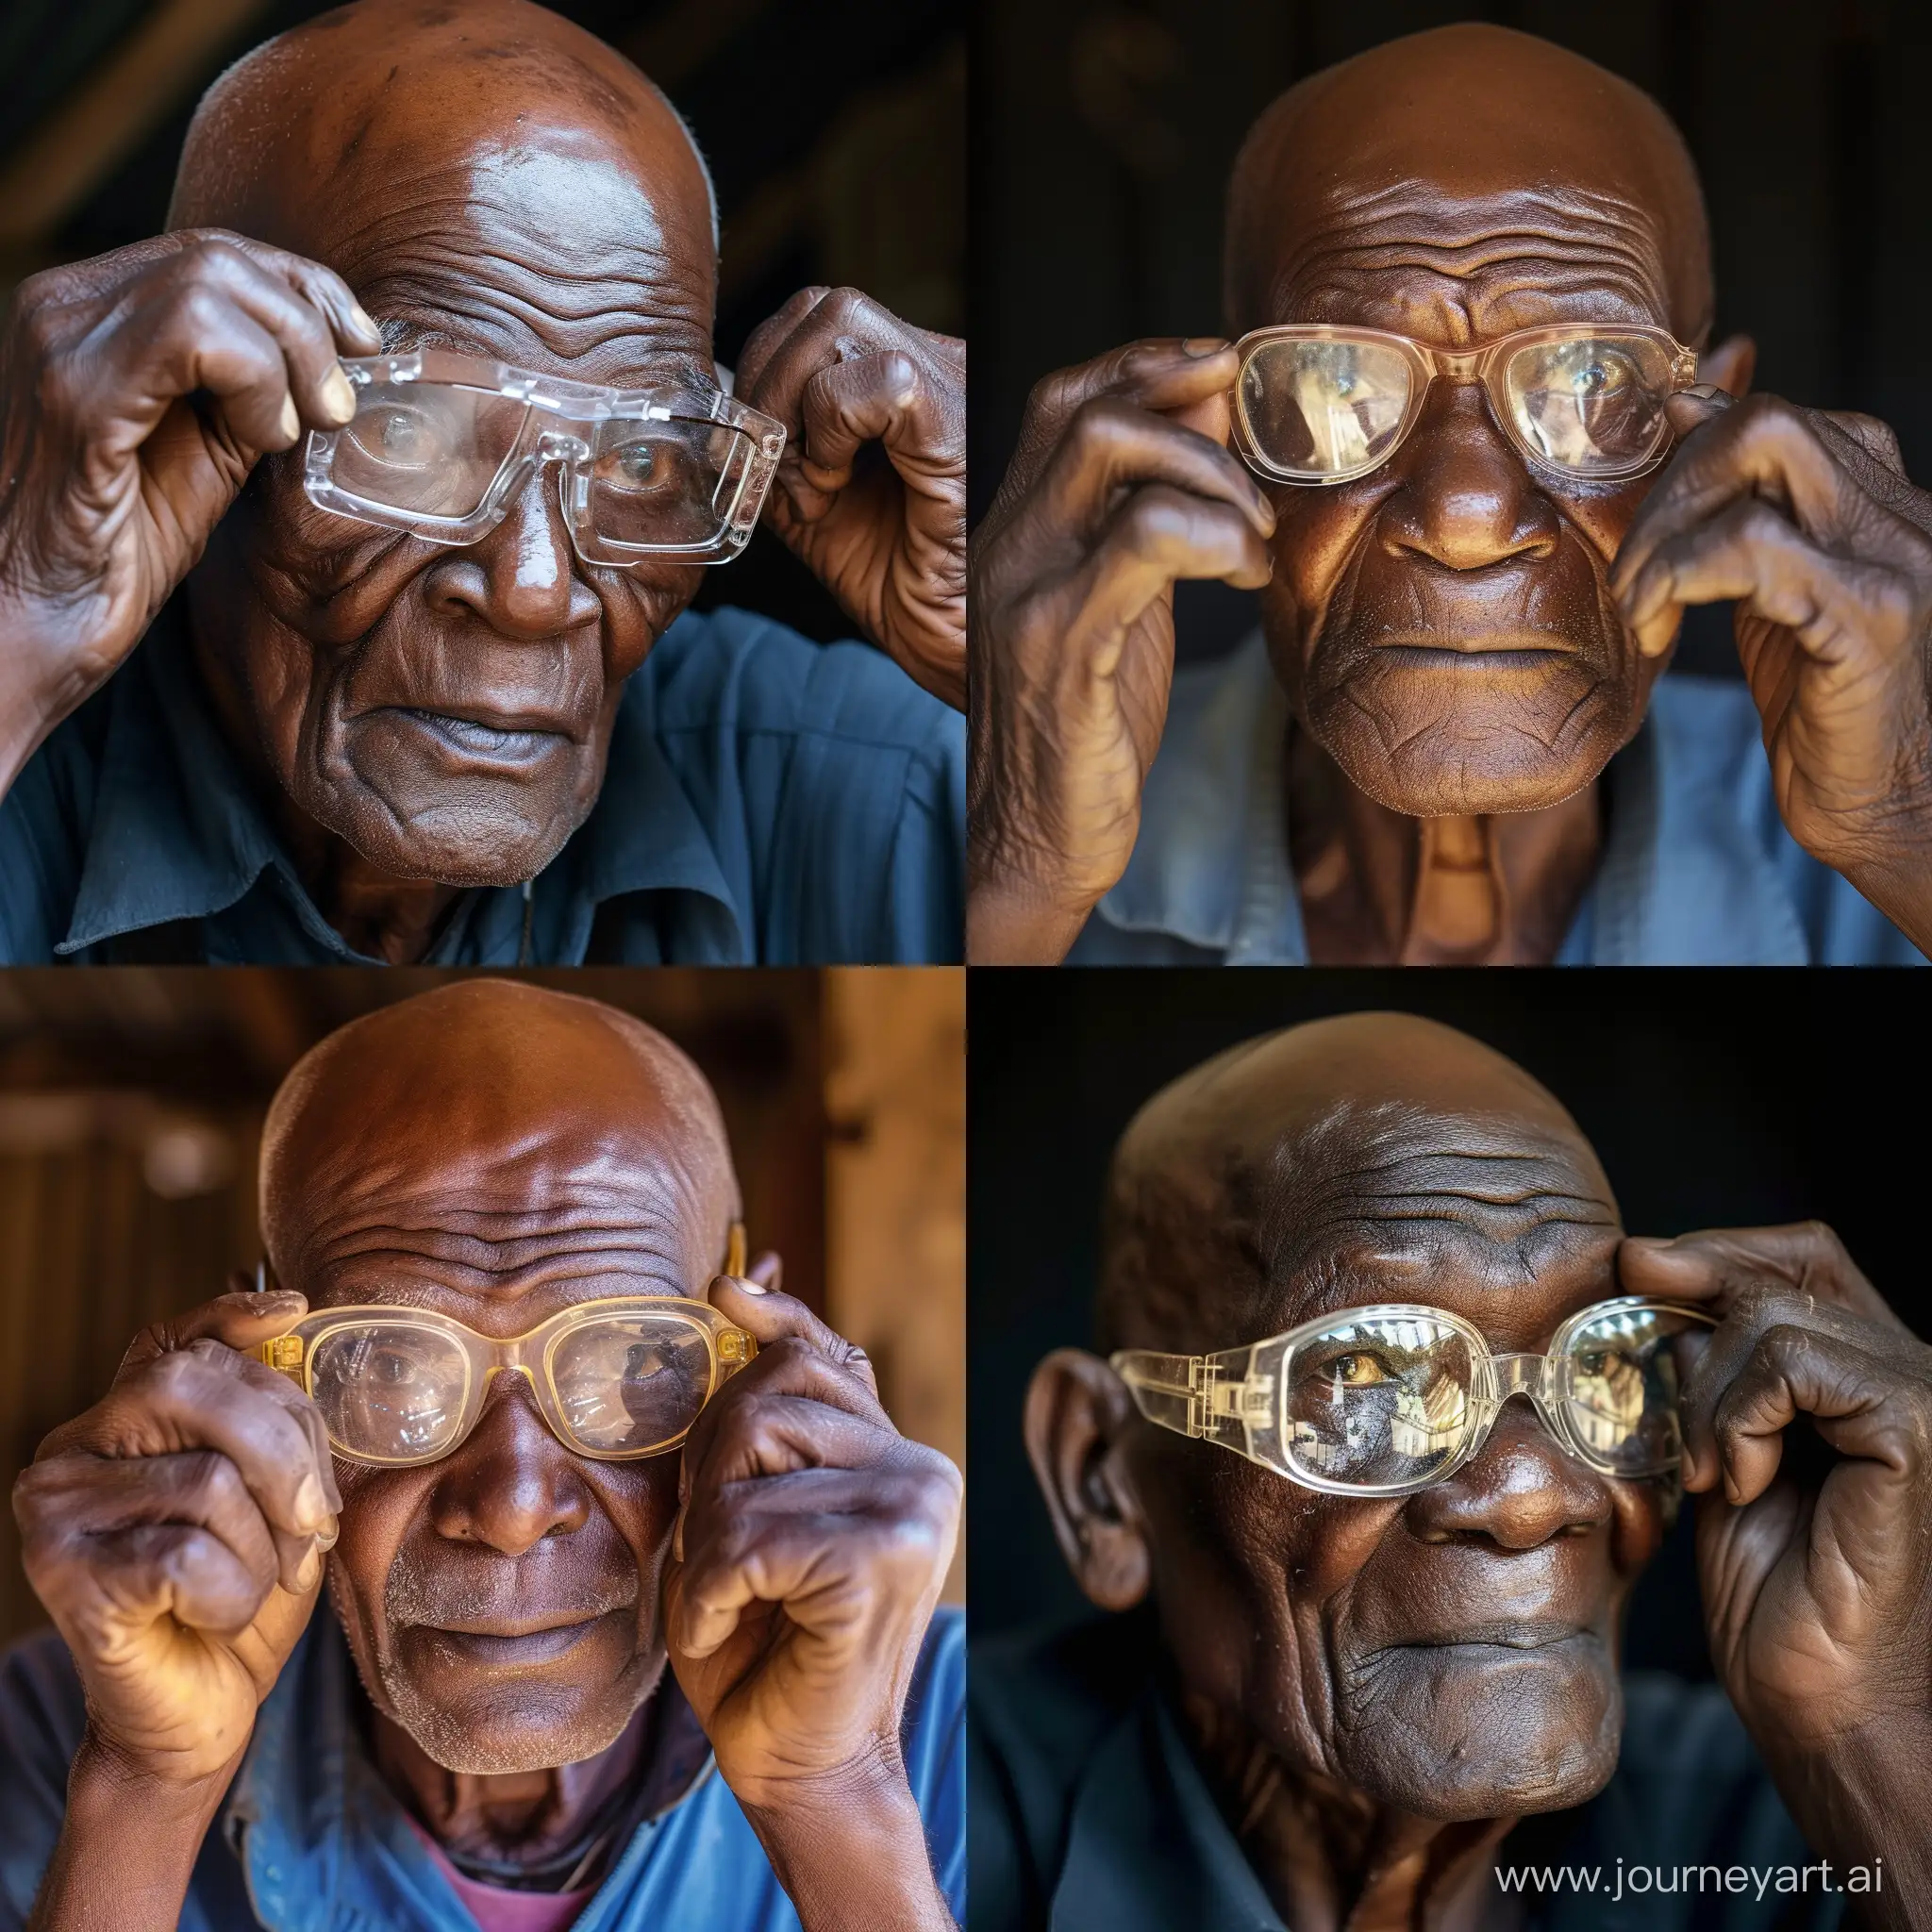 Old bald African man adjusting his old clear and reflective reading glasses.